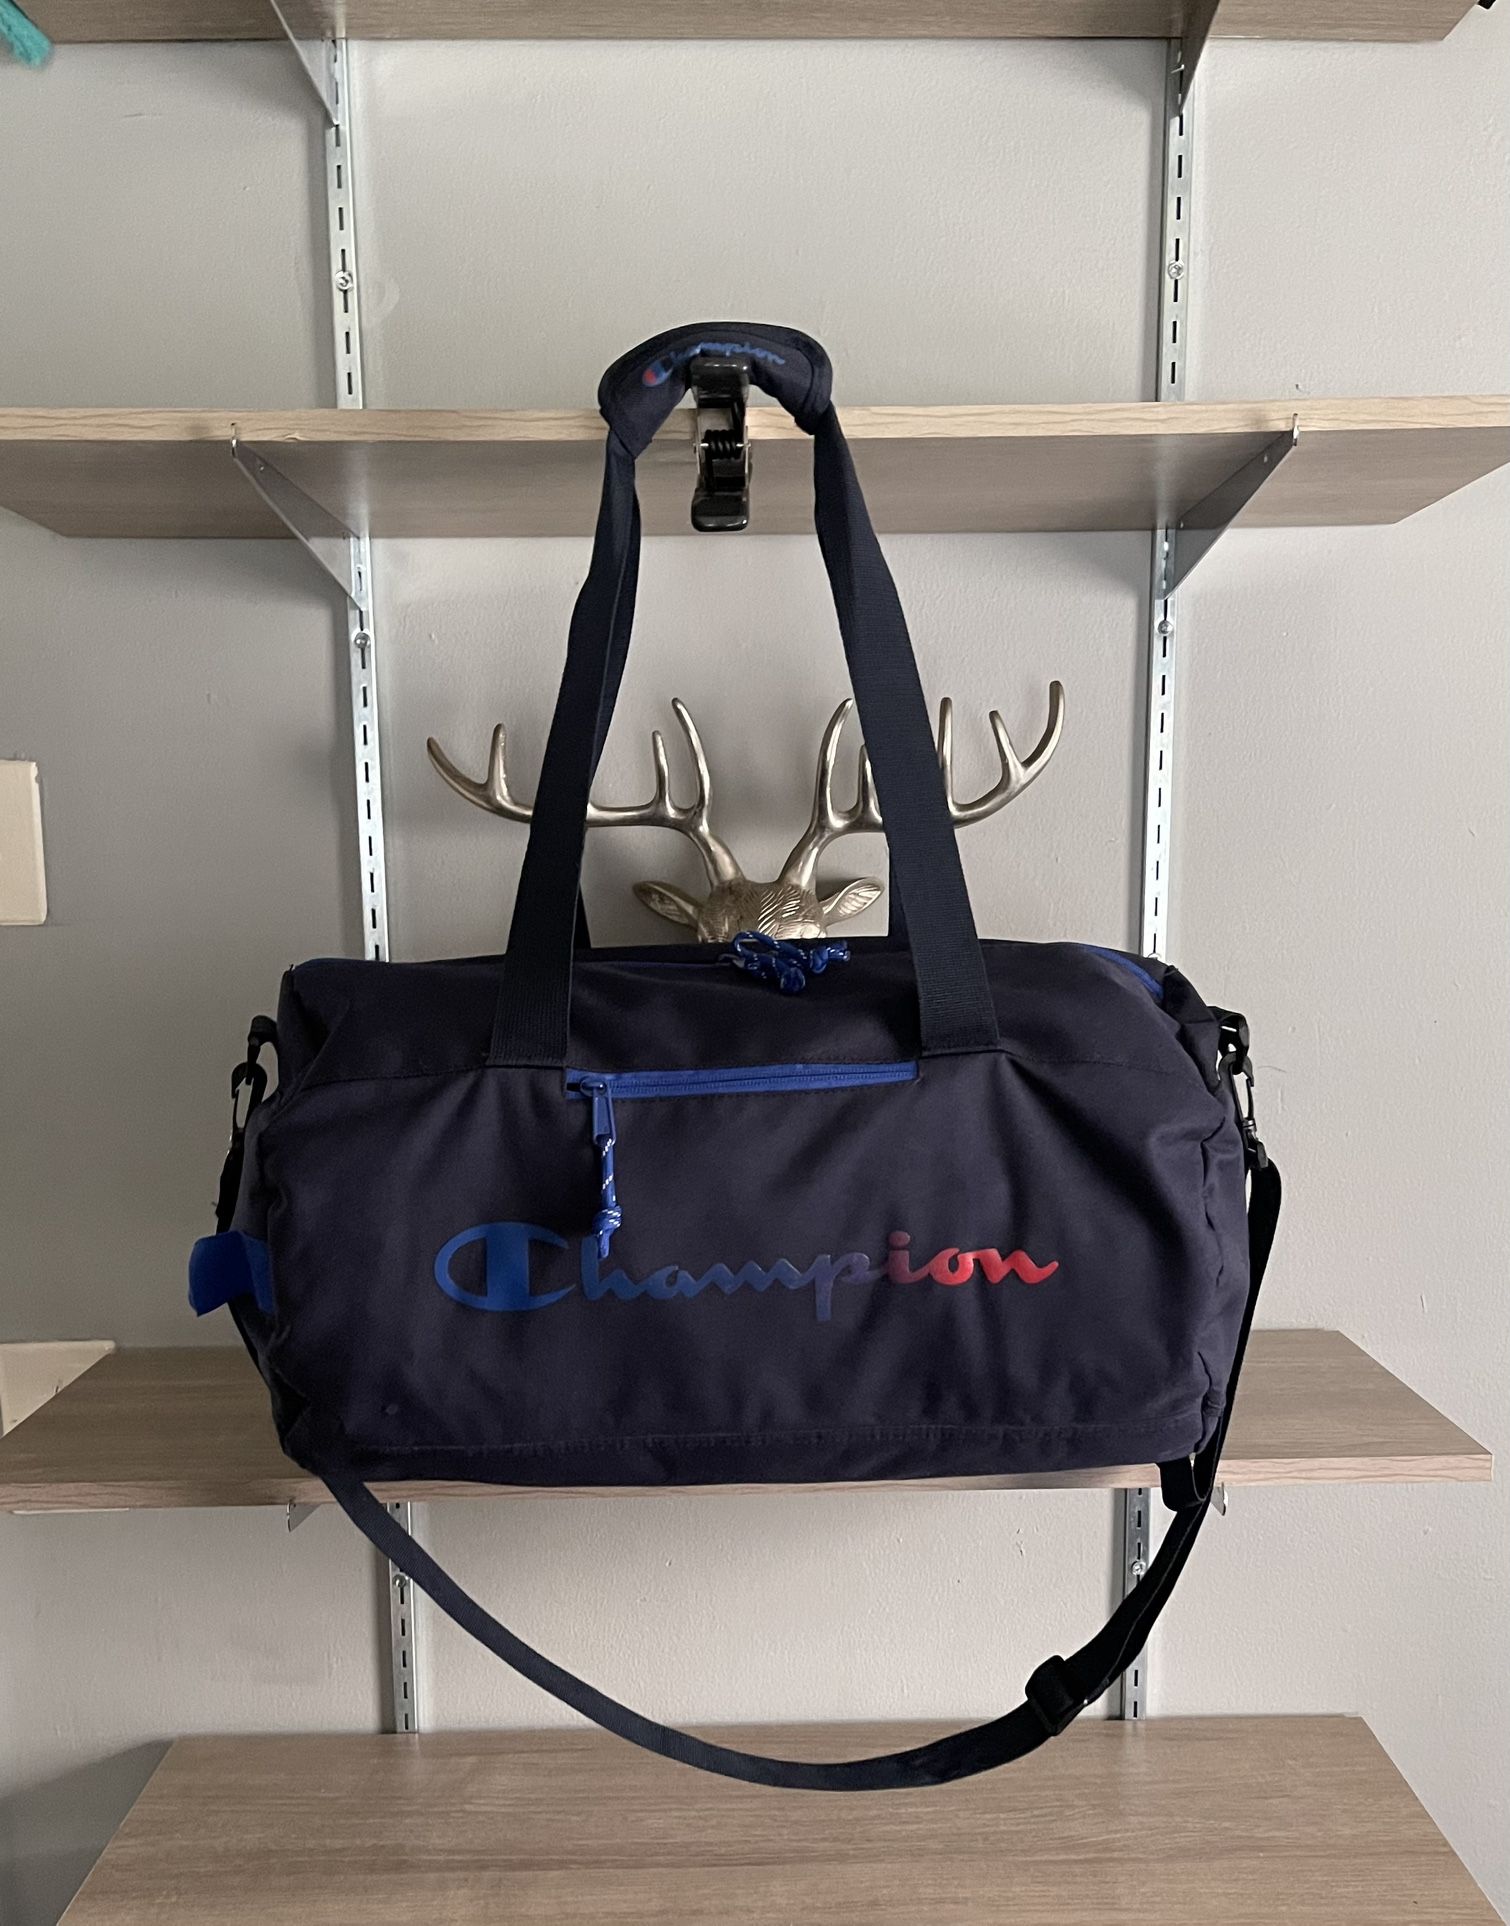 Men’s Champion Large duffel bag with adjustable Crossbody strap. Retail $48. Has one flaw as pictured other than that great condition. Color navy blue